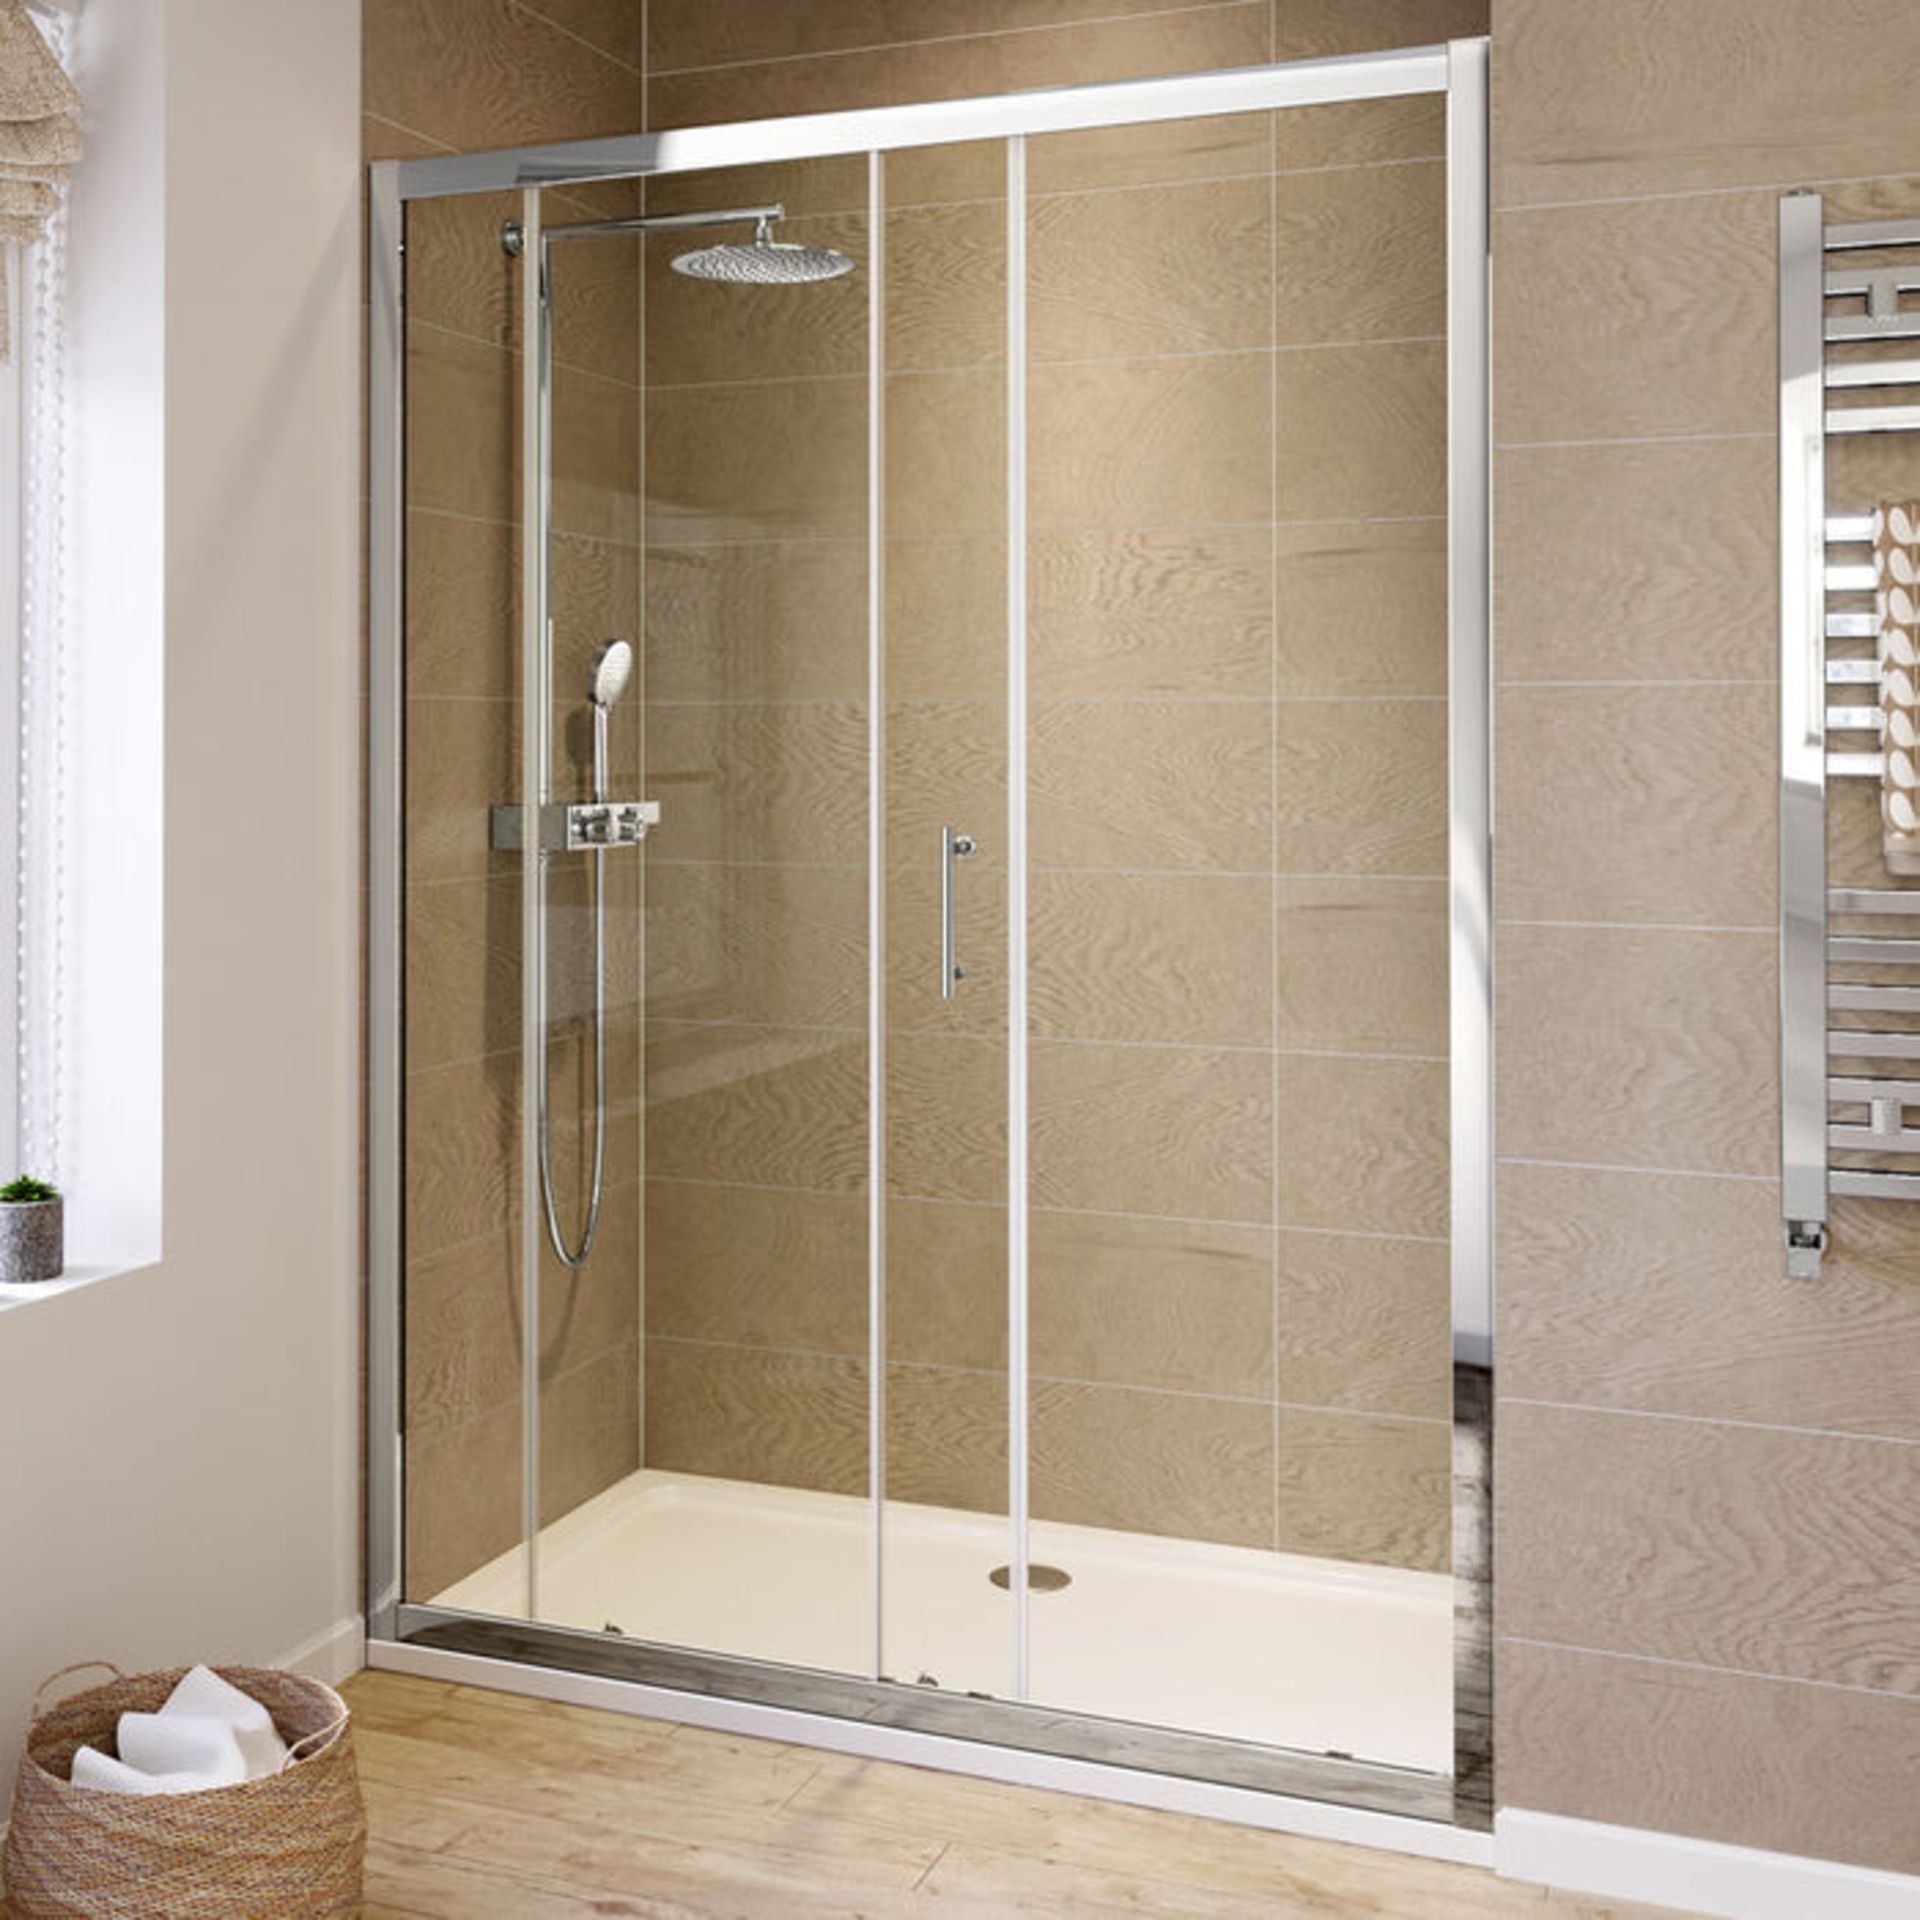 NEW & BOXED 1700mm - 6mm - Elements Sliding Shower Door. RRP £299.99.6mm Safety Glass Fully wa... - Image 2 of 3